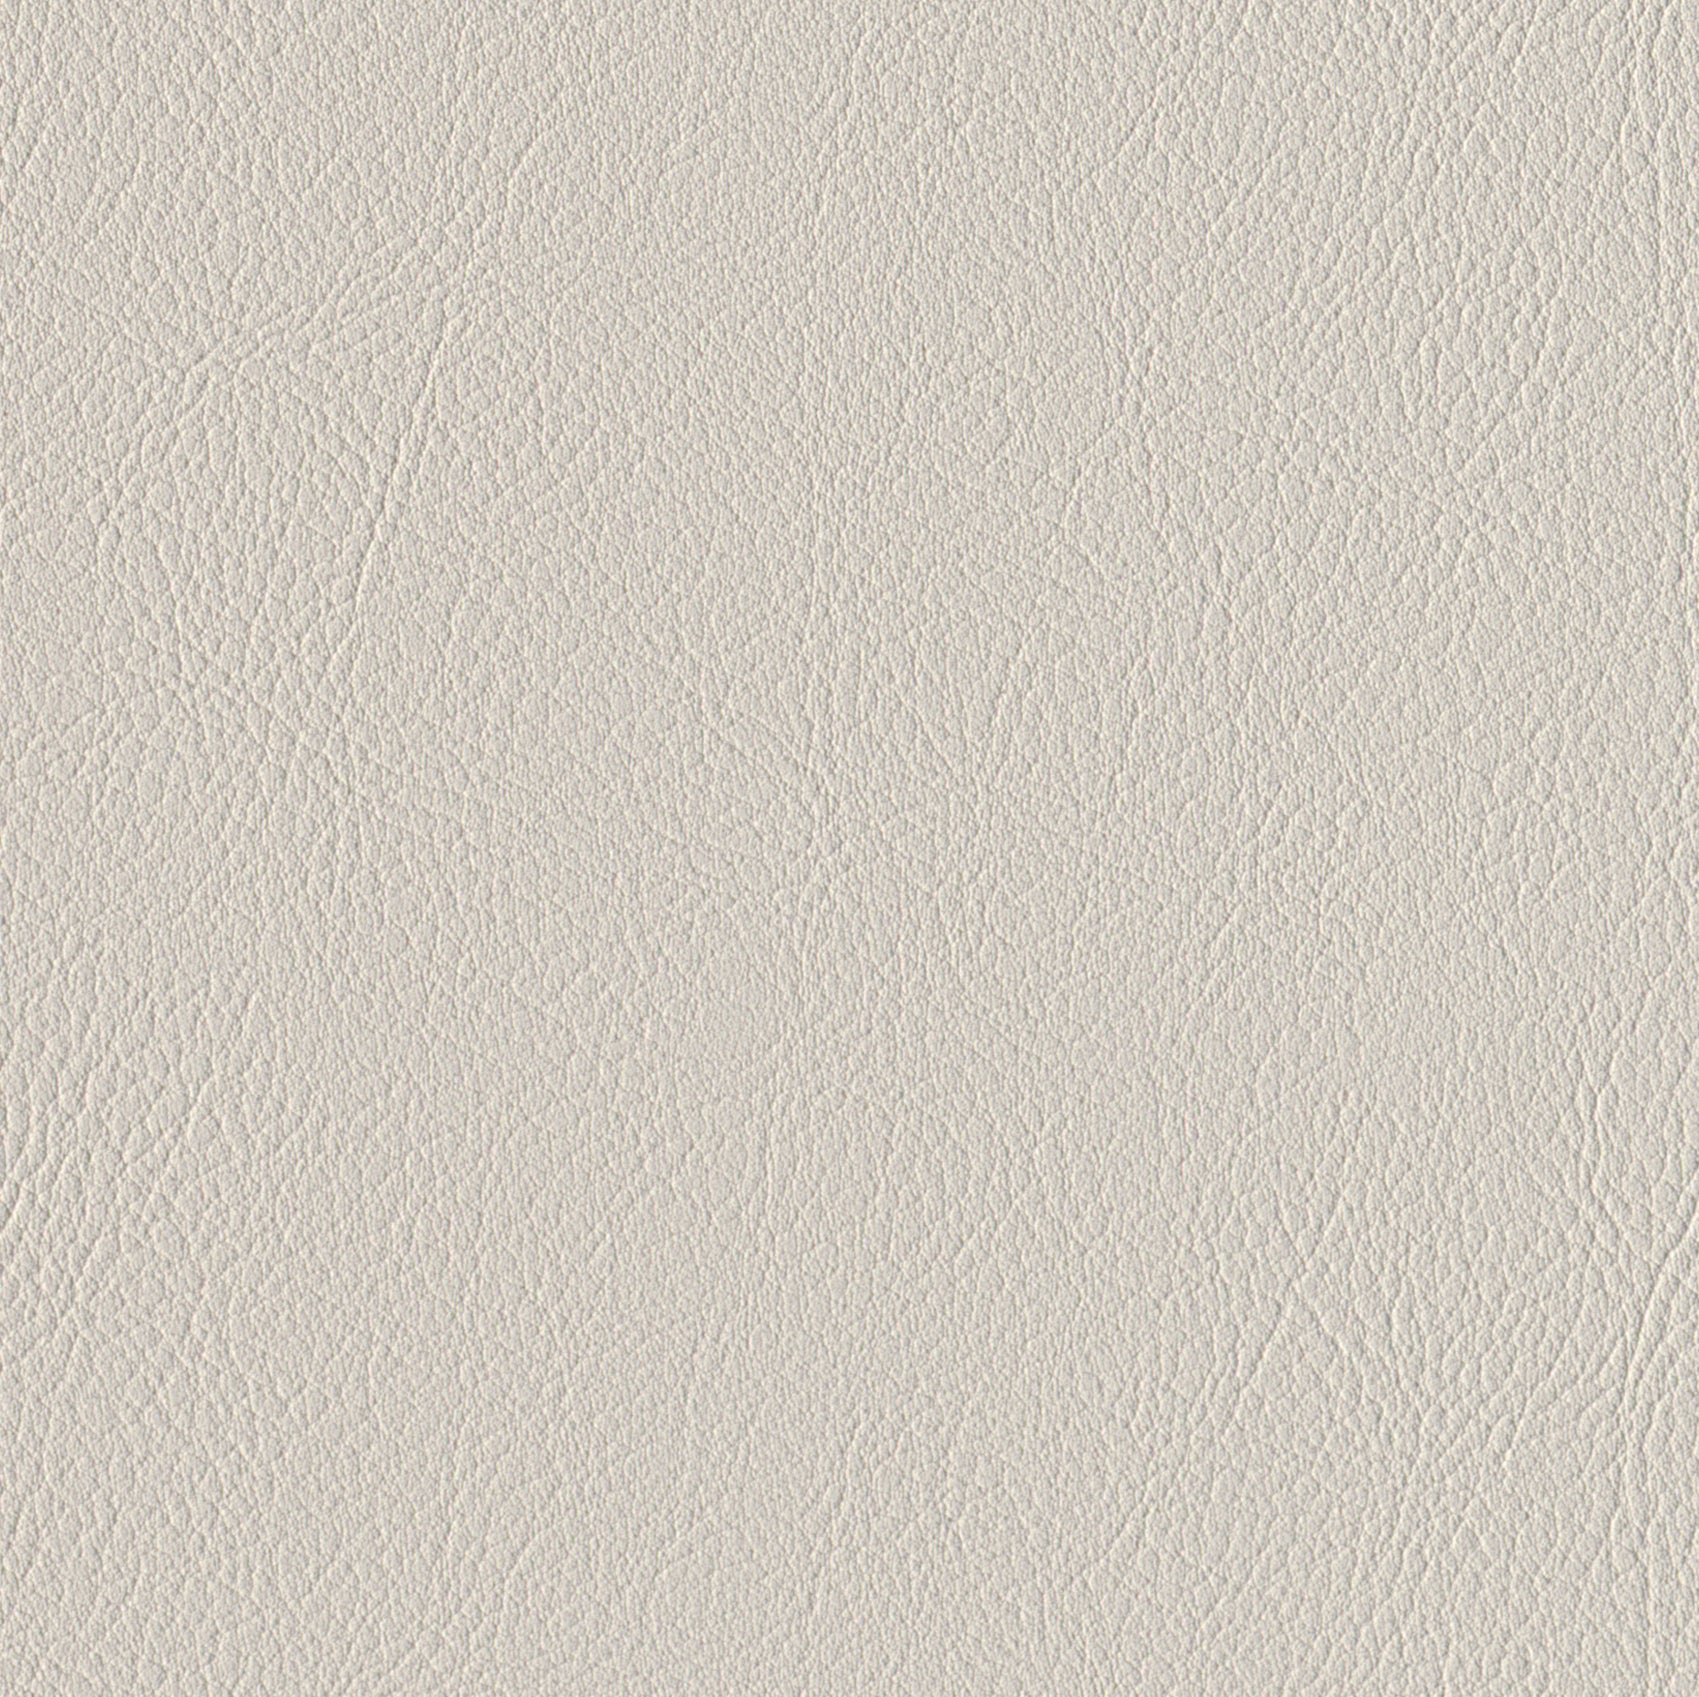 Andriali-Contract-Vinyl_Upholstery-Design-LegacyFR-Color-010WhiteHeron-Width-140cm